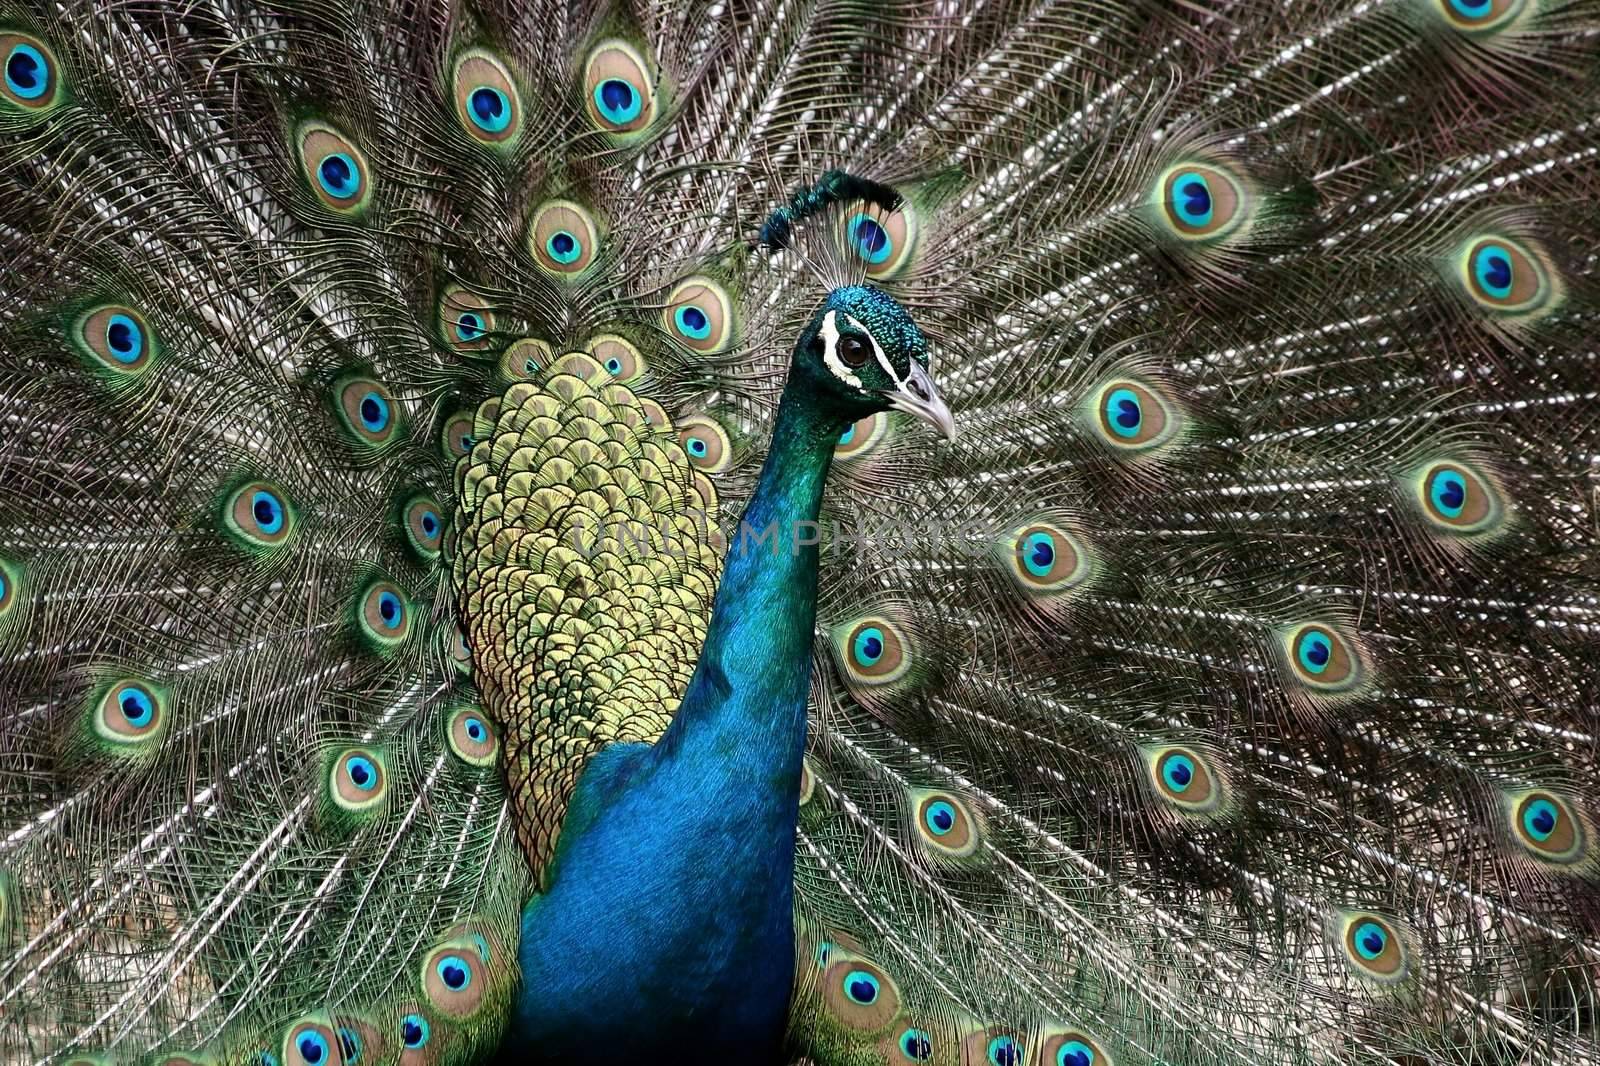 Male peacock showing off his beautiful feathers to attract a mate